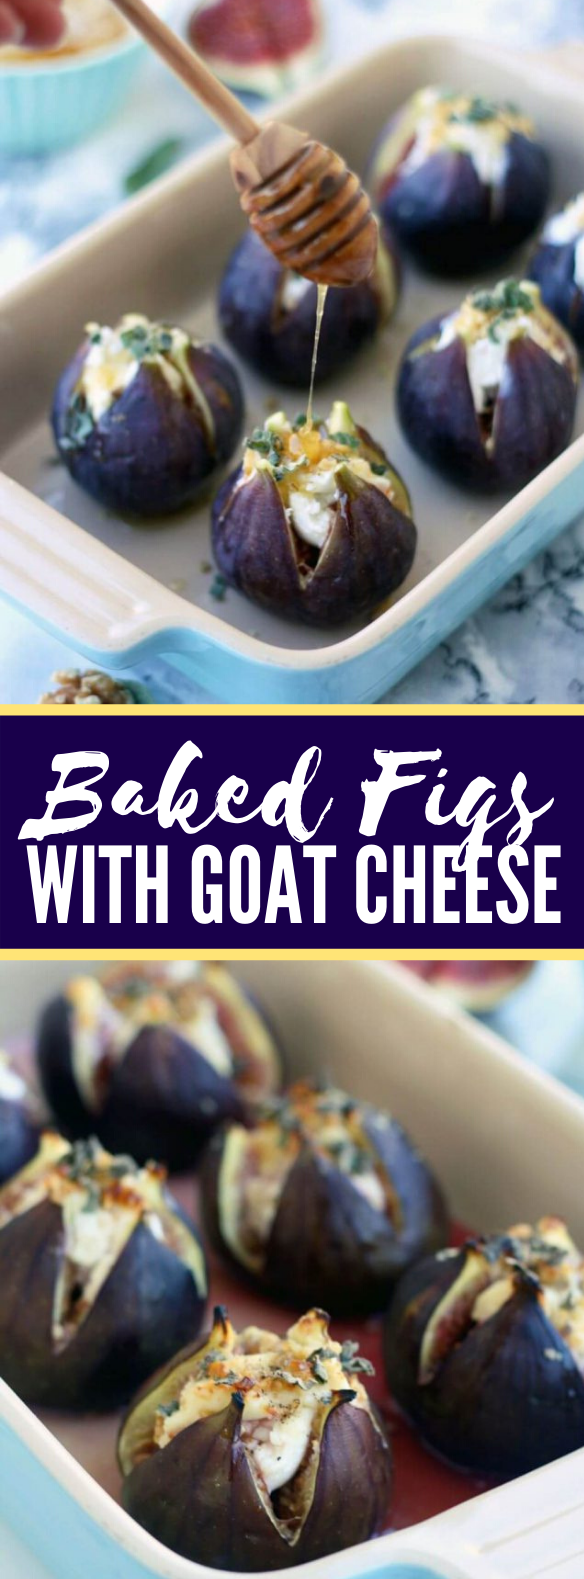 Baked Figs with Goat Cheese #appetizers #brunch